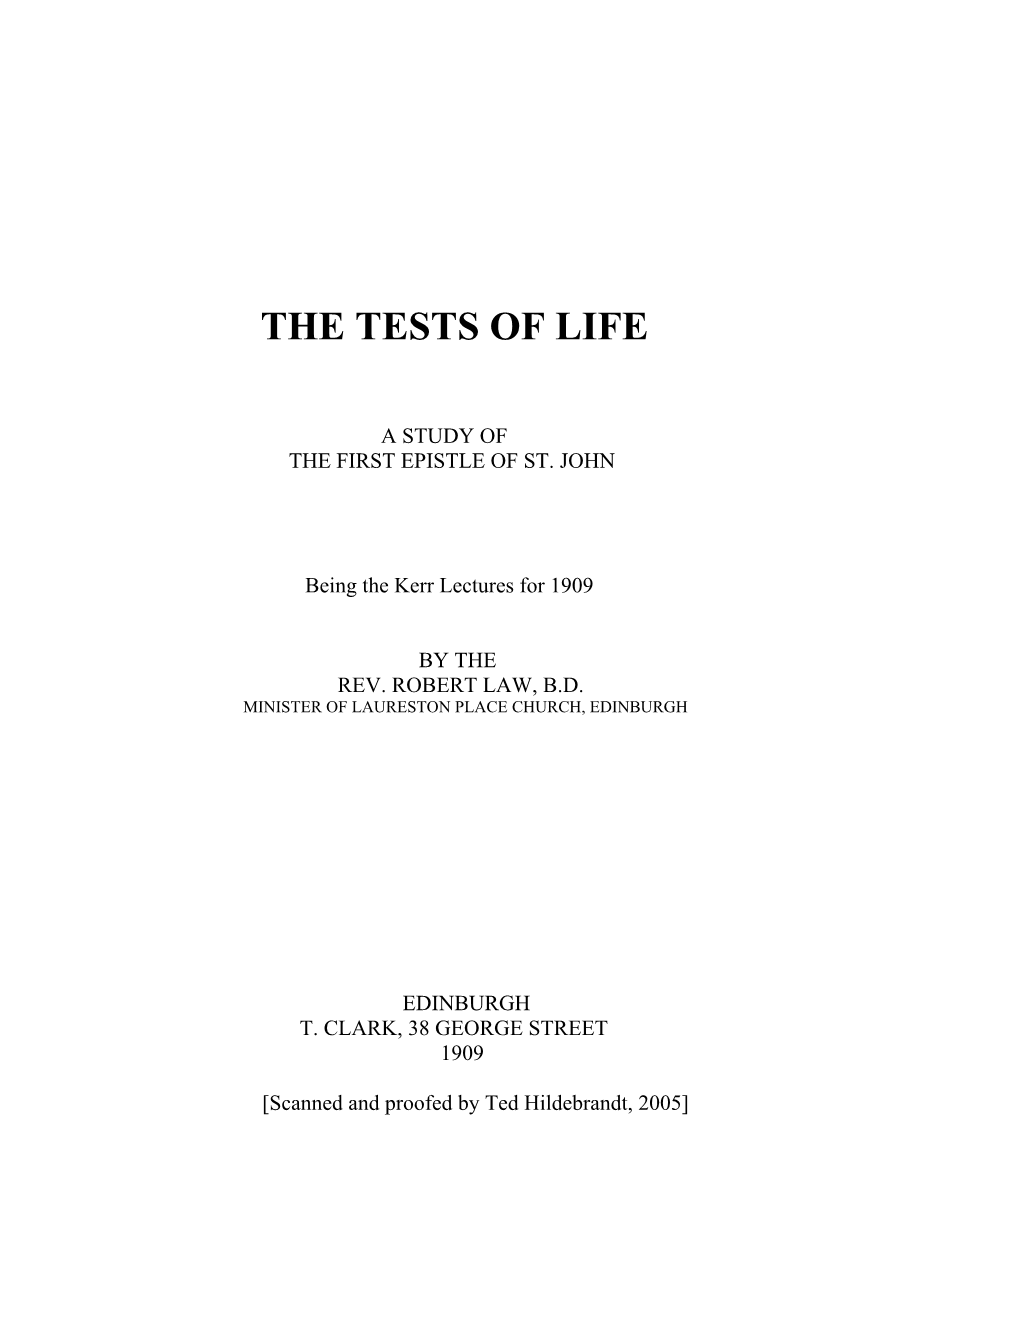 The Tests of Life